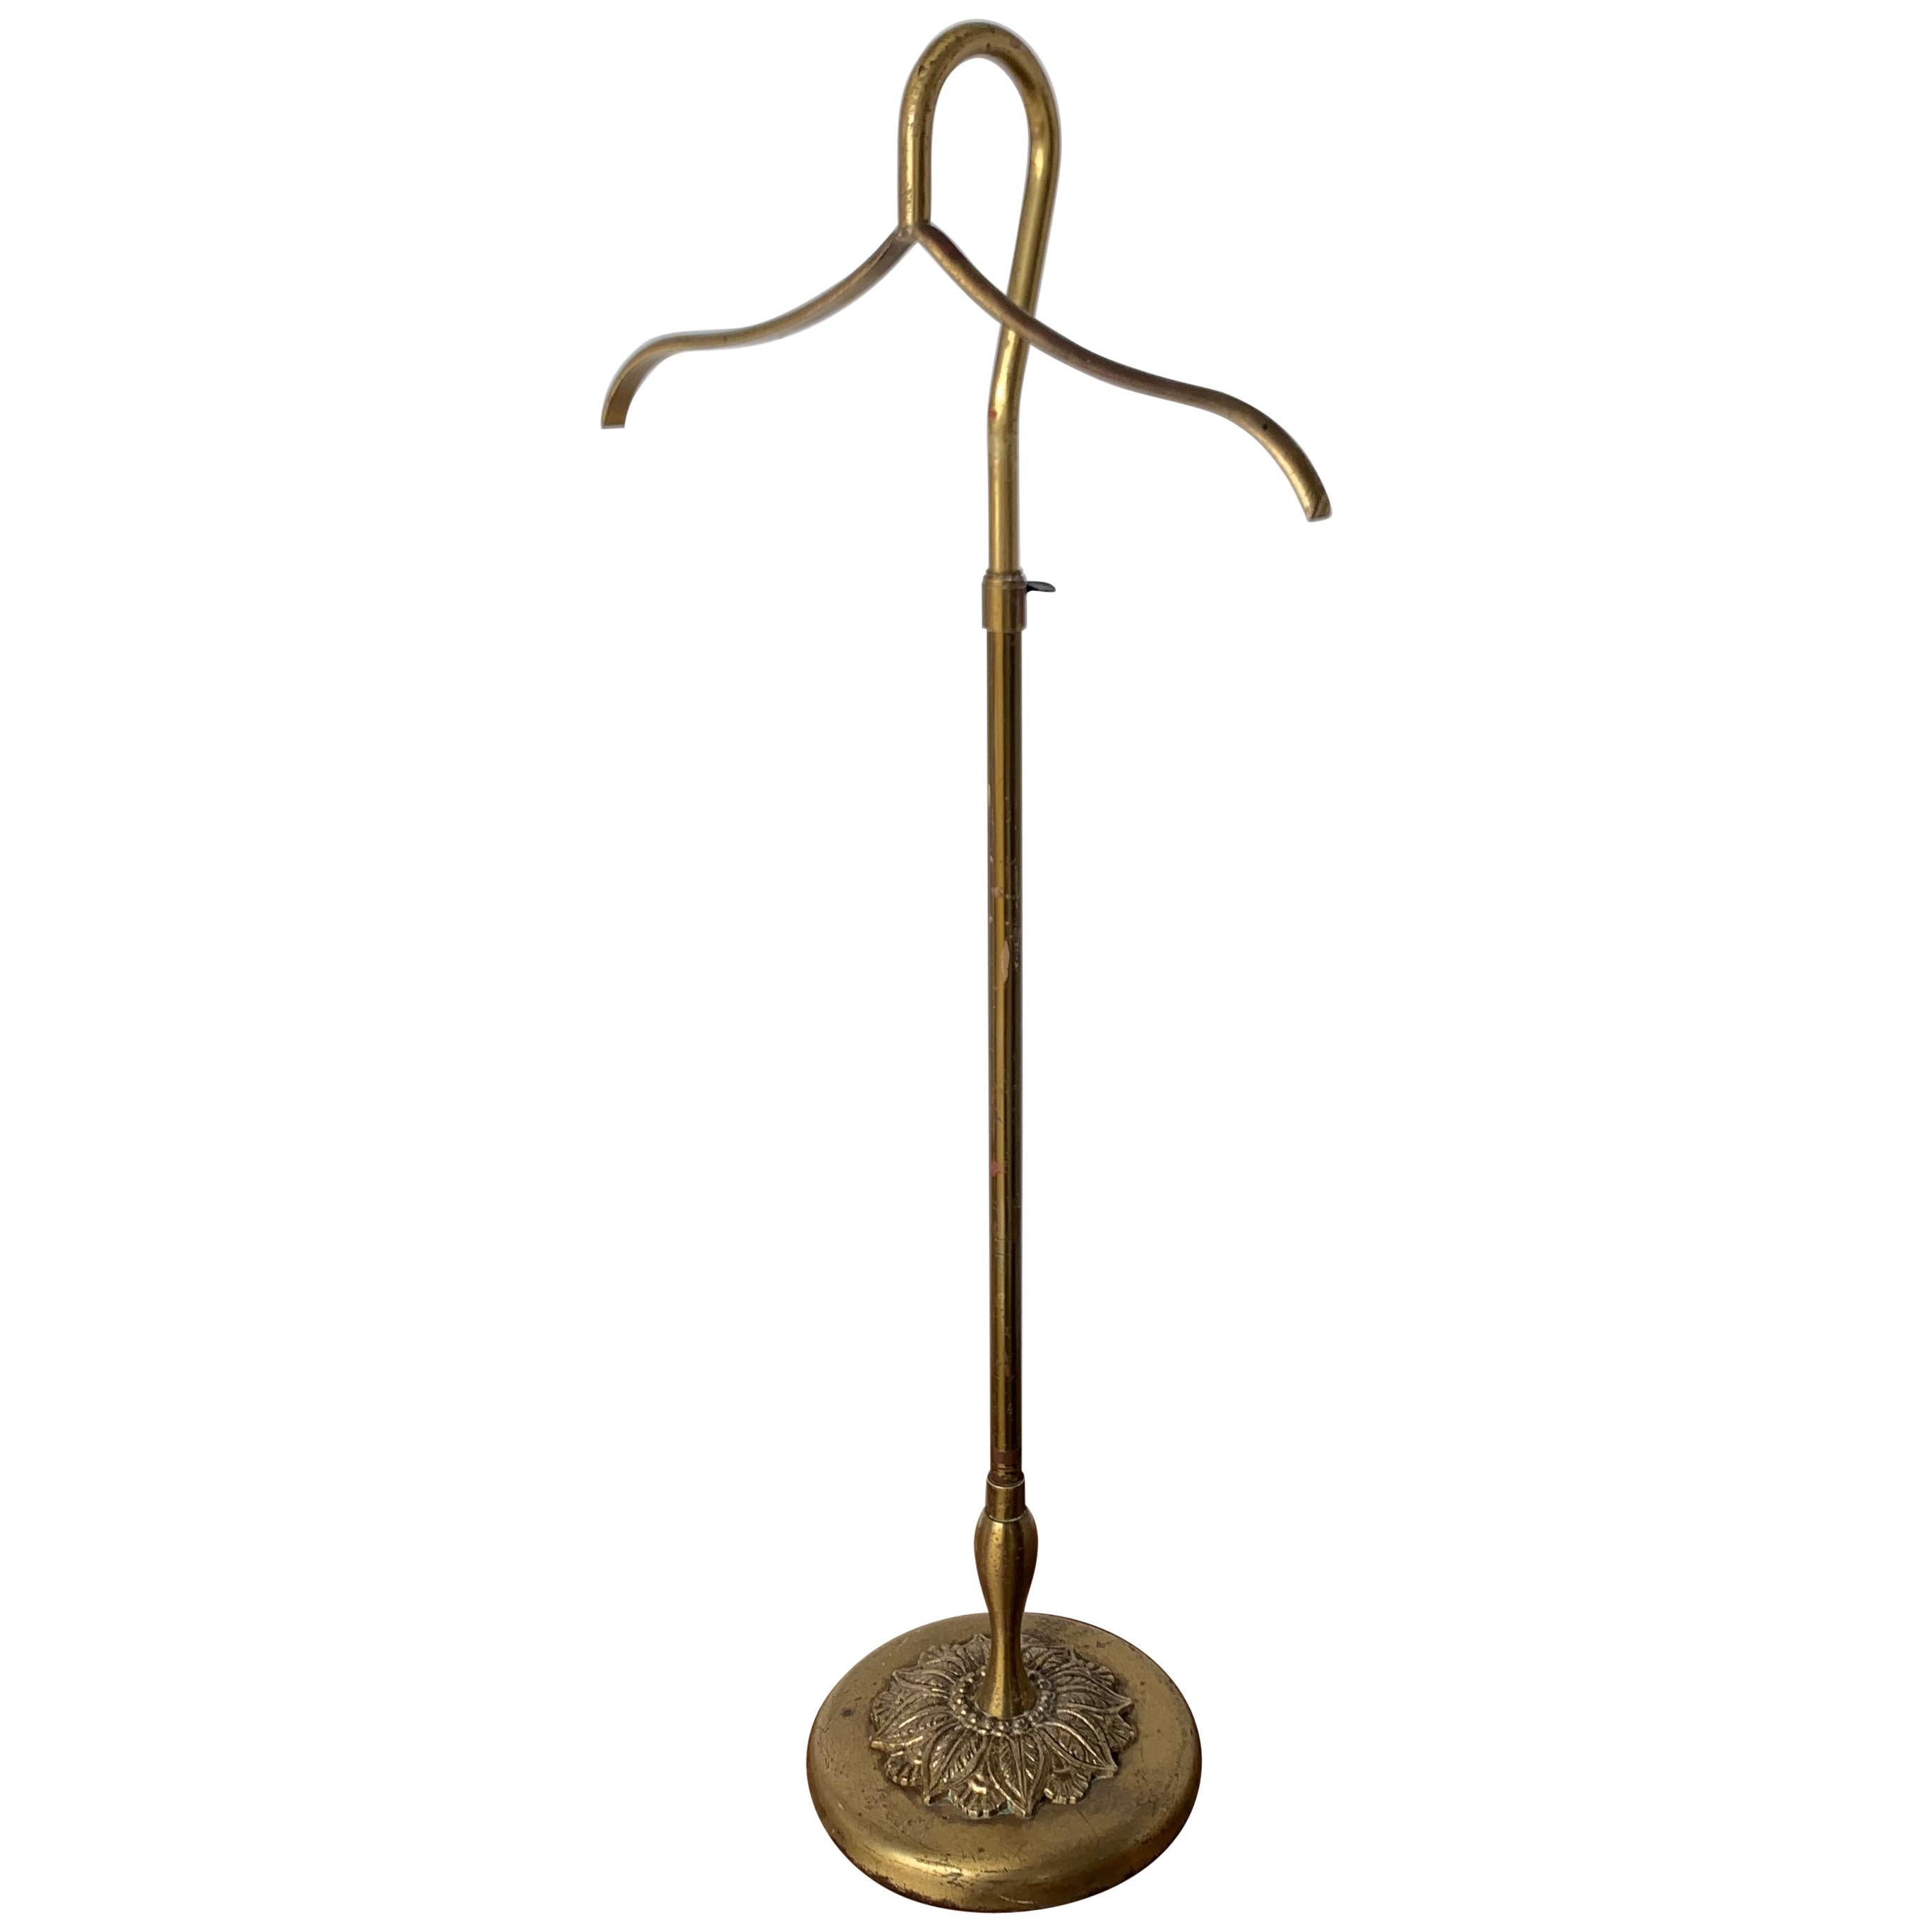 Early French Height Adjustable Brass Coat or Shirt Holder Stand